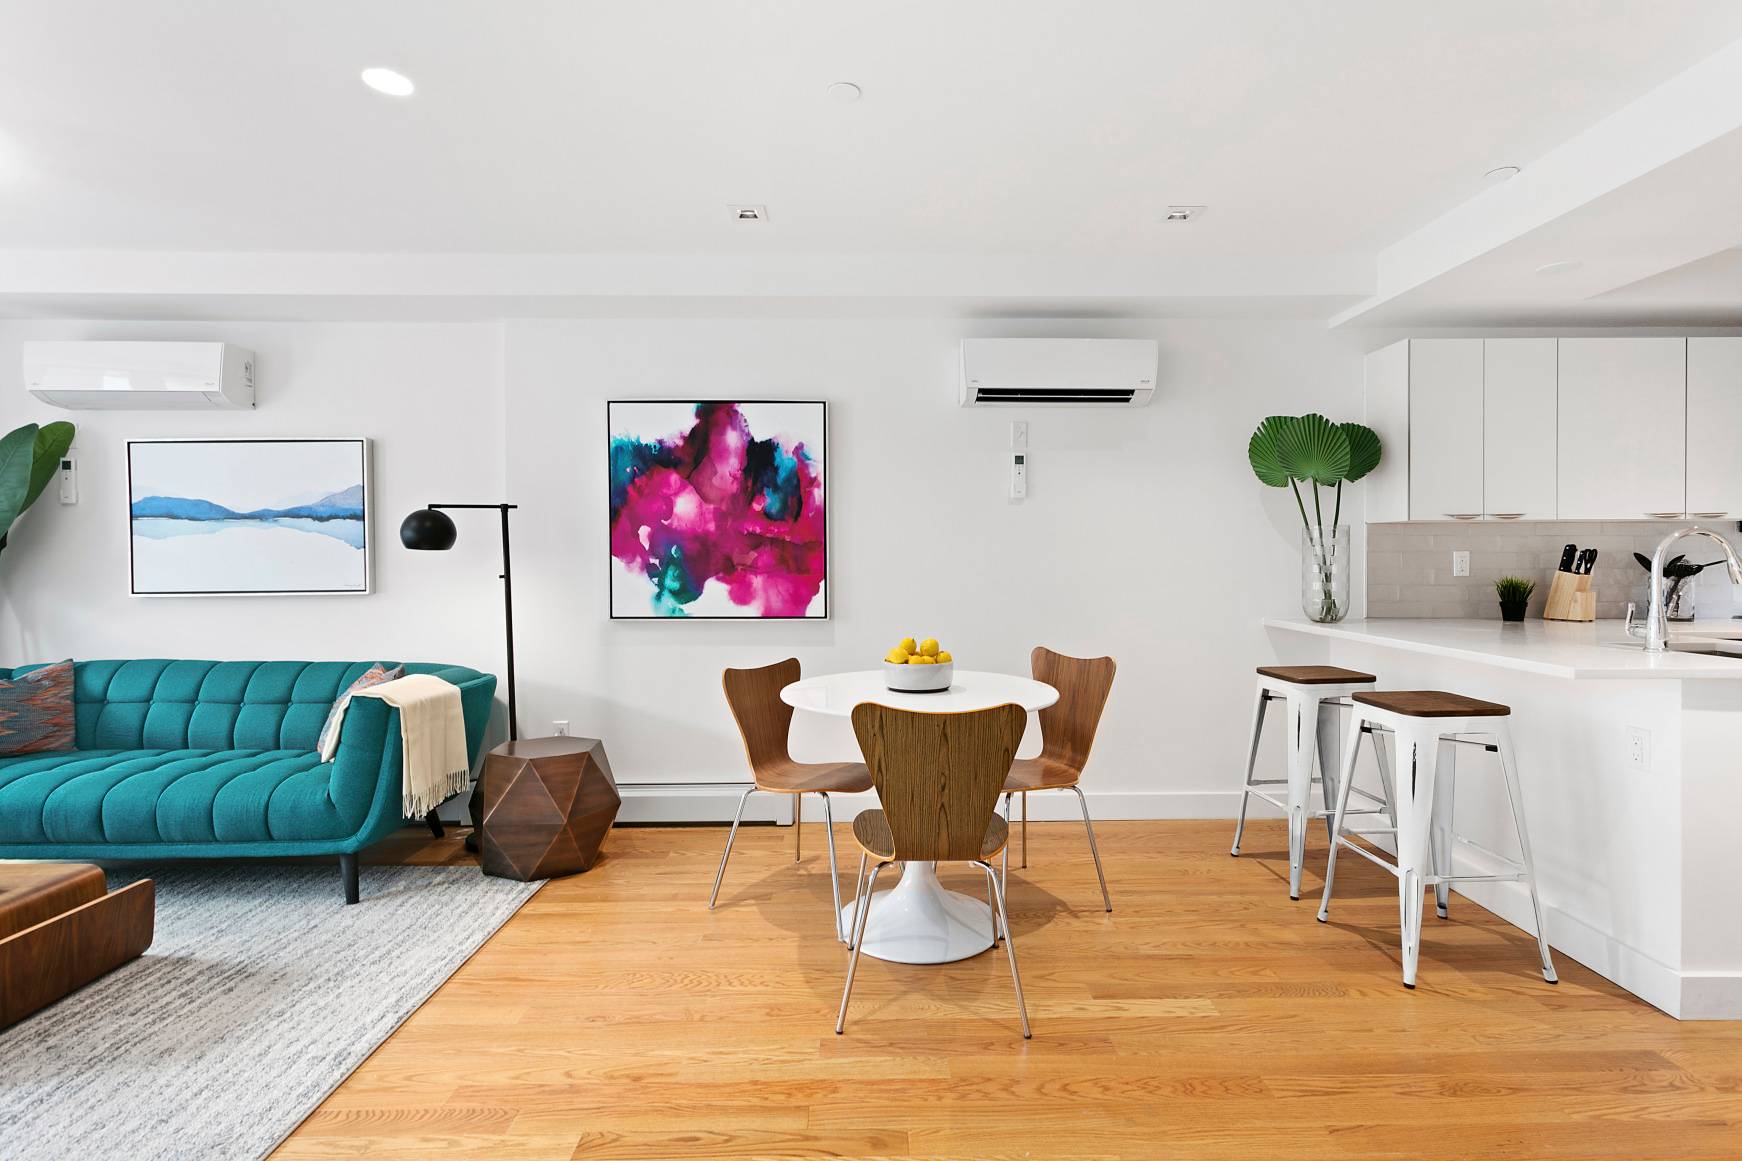 THE PARK 21 is a boutique 24 unit rental building nestled between two quiet tree lined blocks offering a refreshingly modern and sleek take on Brooklyn living.